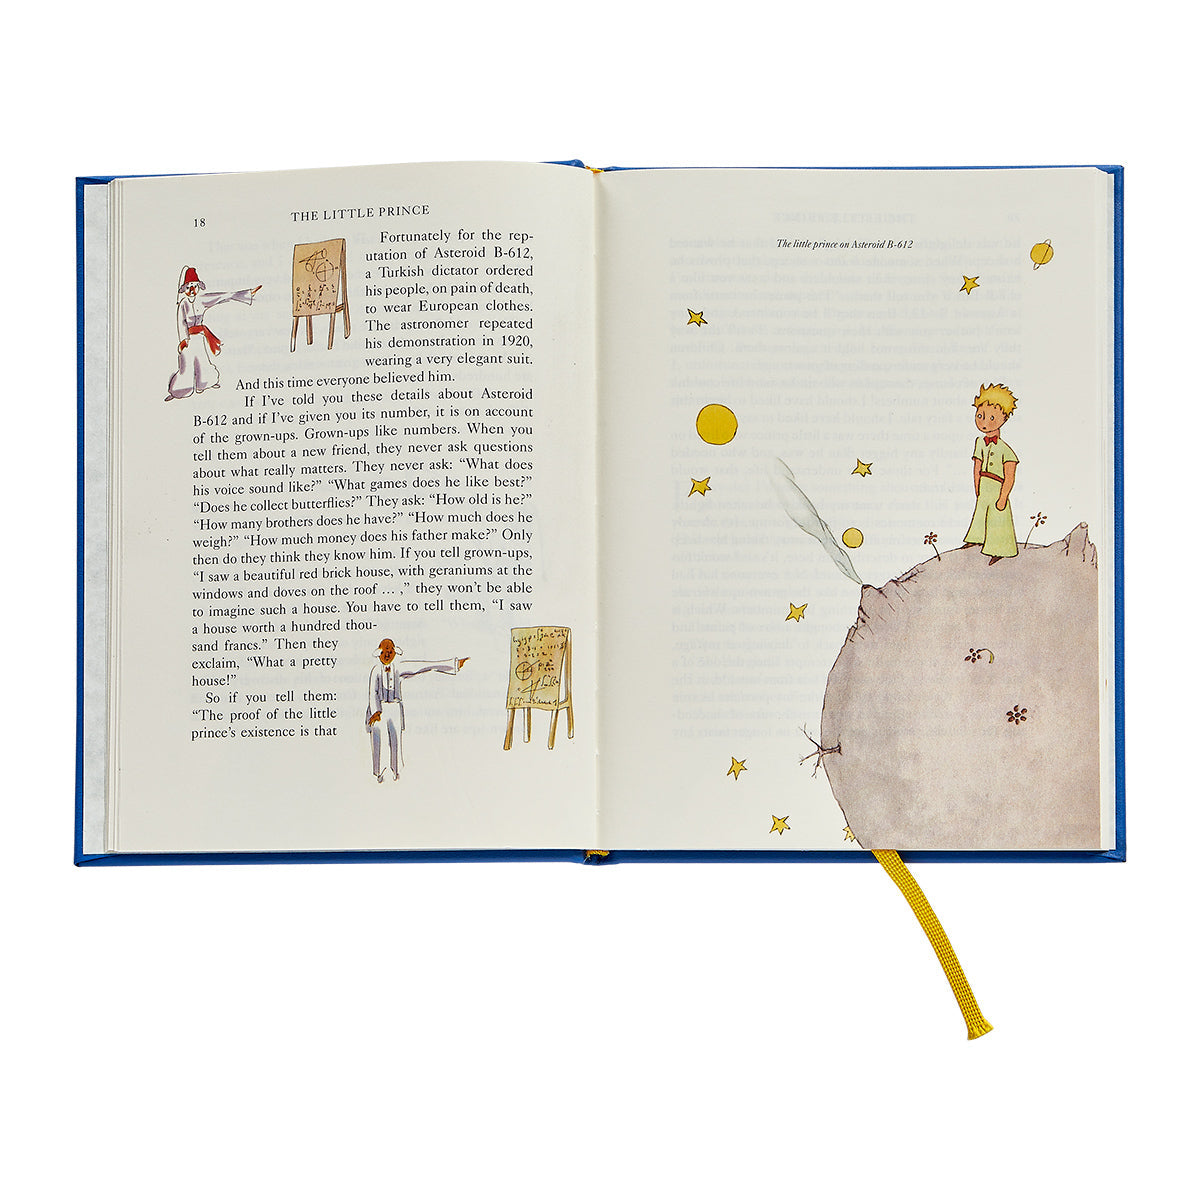 The Little Prince - Blue Bonded Leather